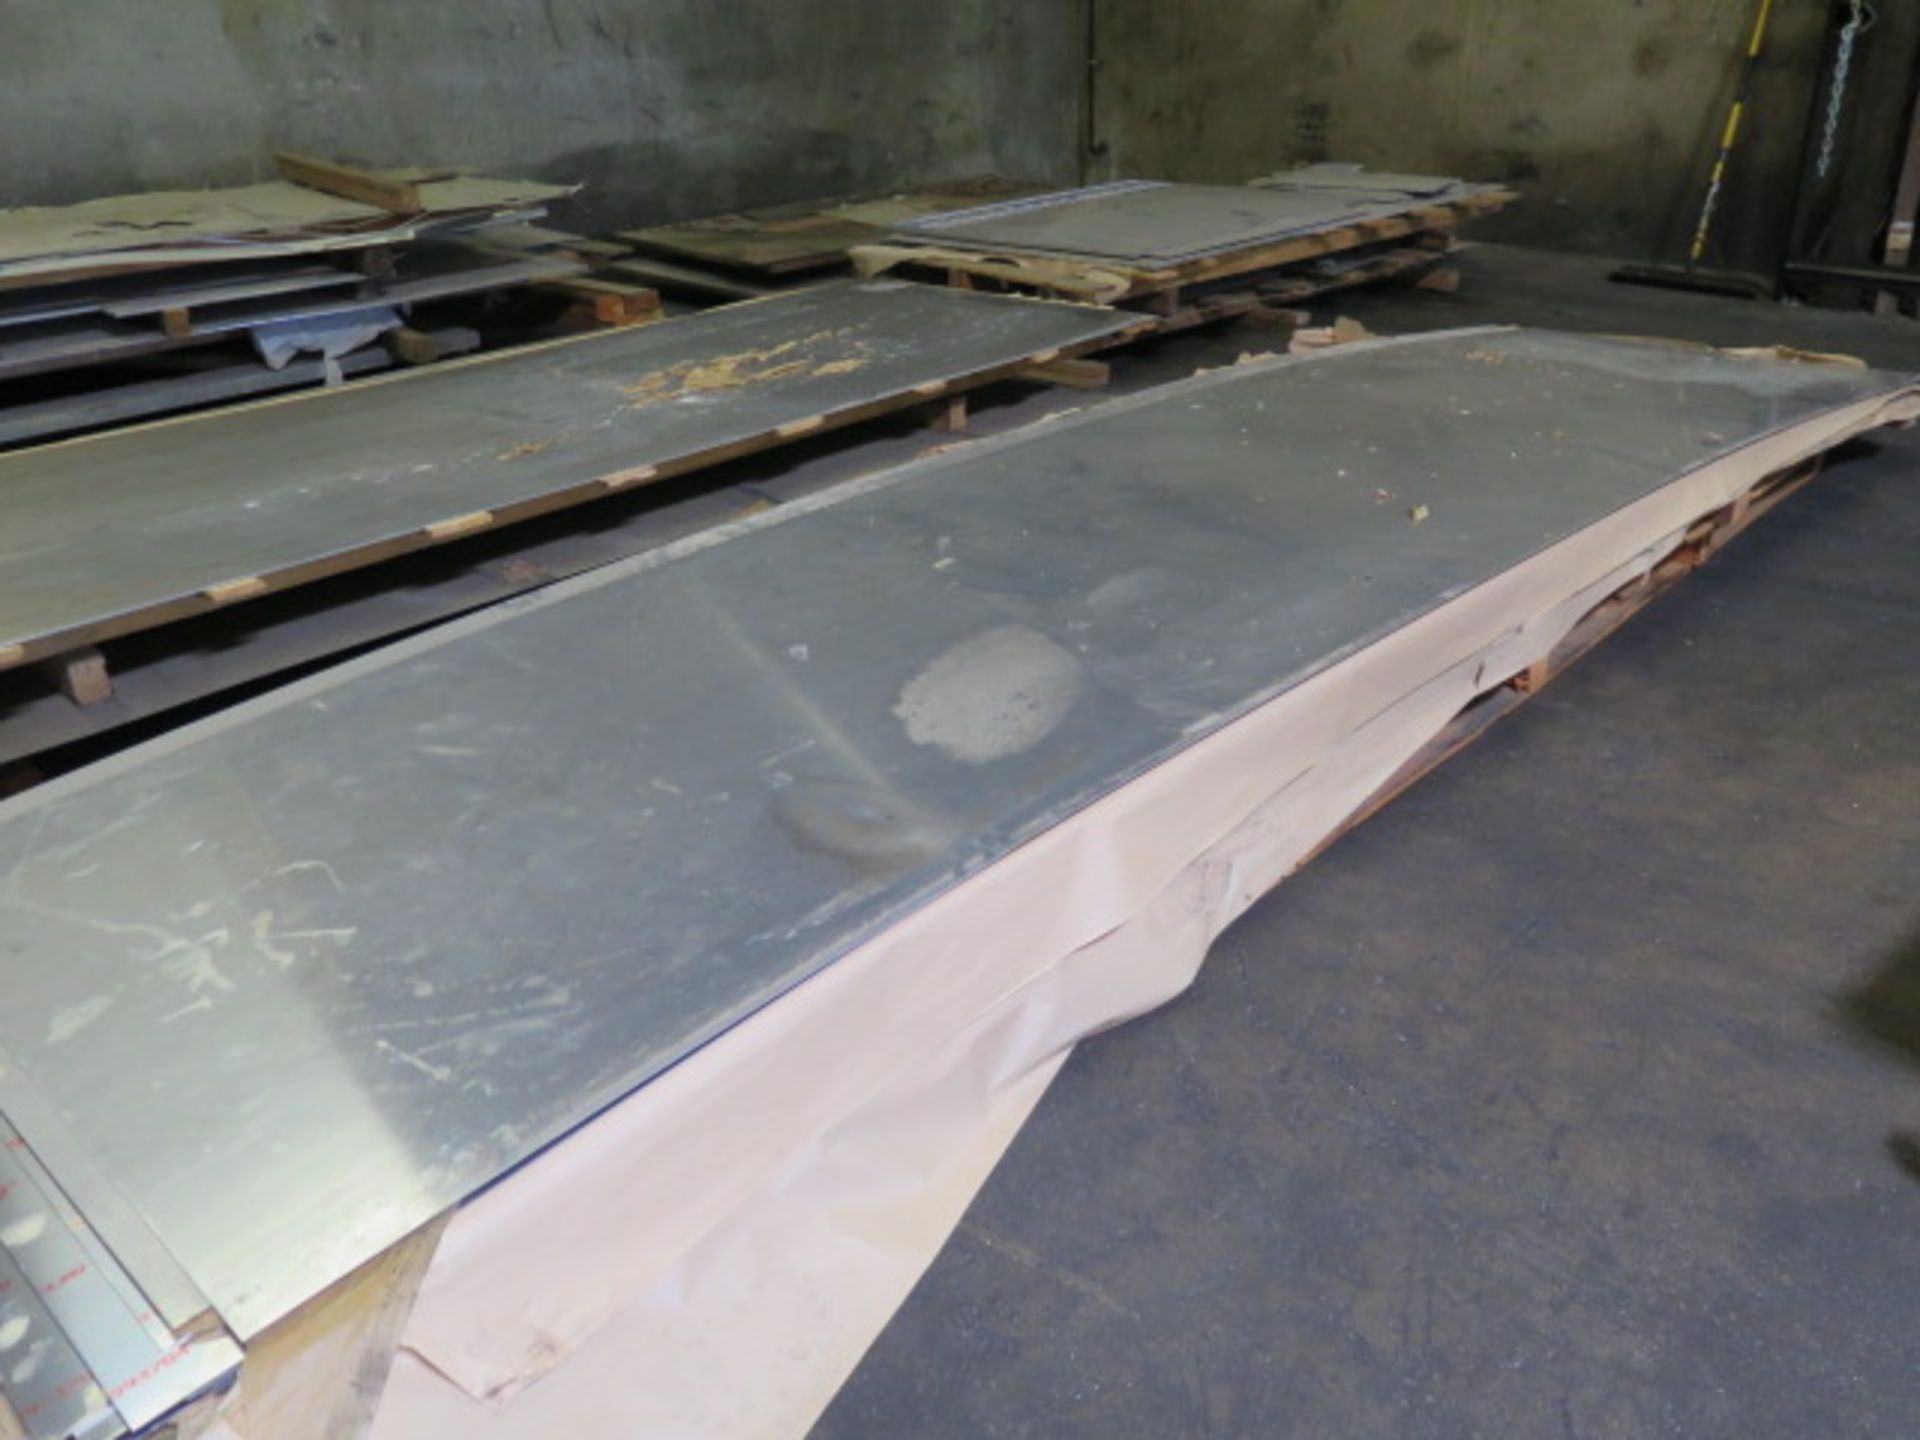 Aluminum Sheet Stock and Misc Bar Stock (SOLD AS-IS - NO WARRANTY) - Image 3 of 21